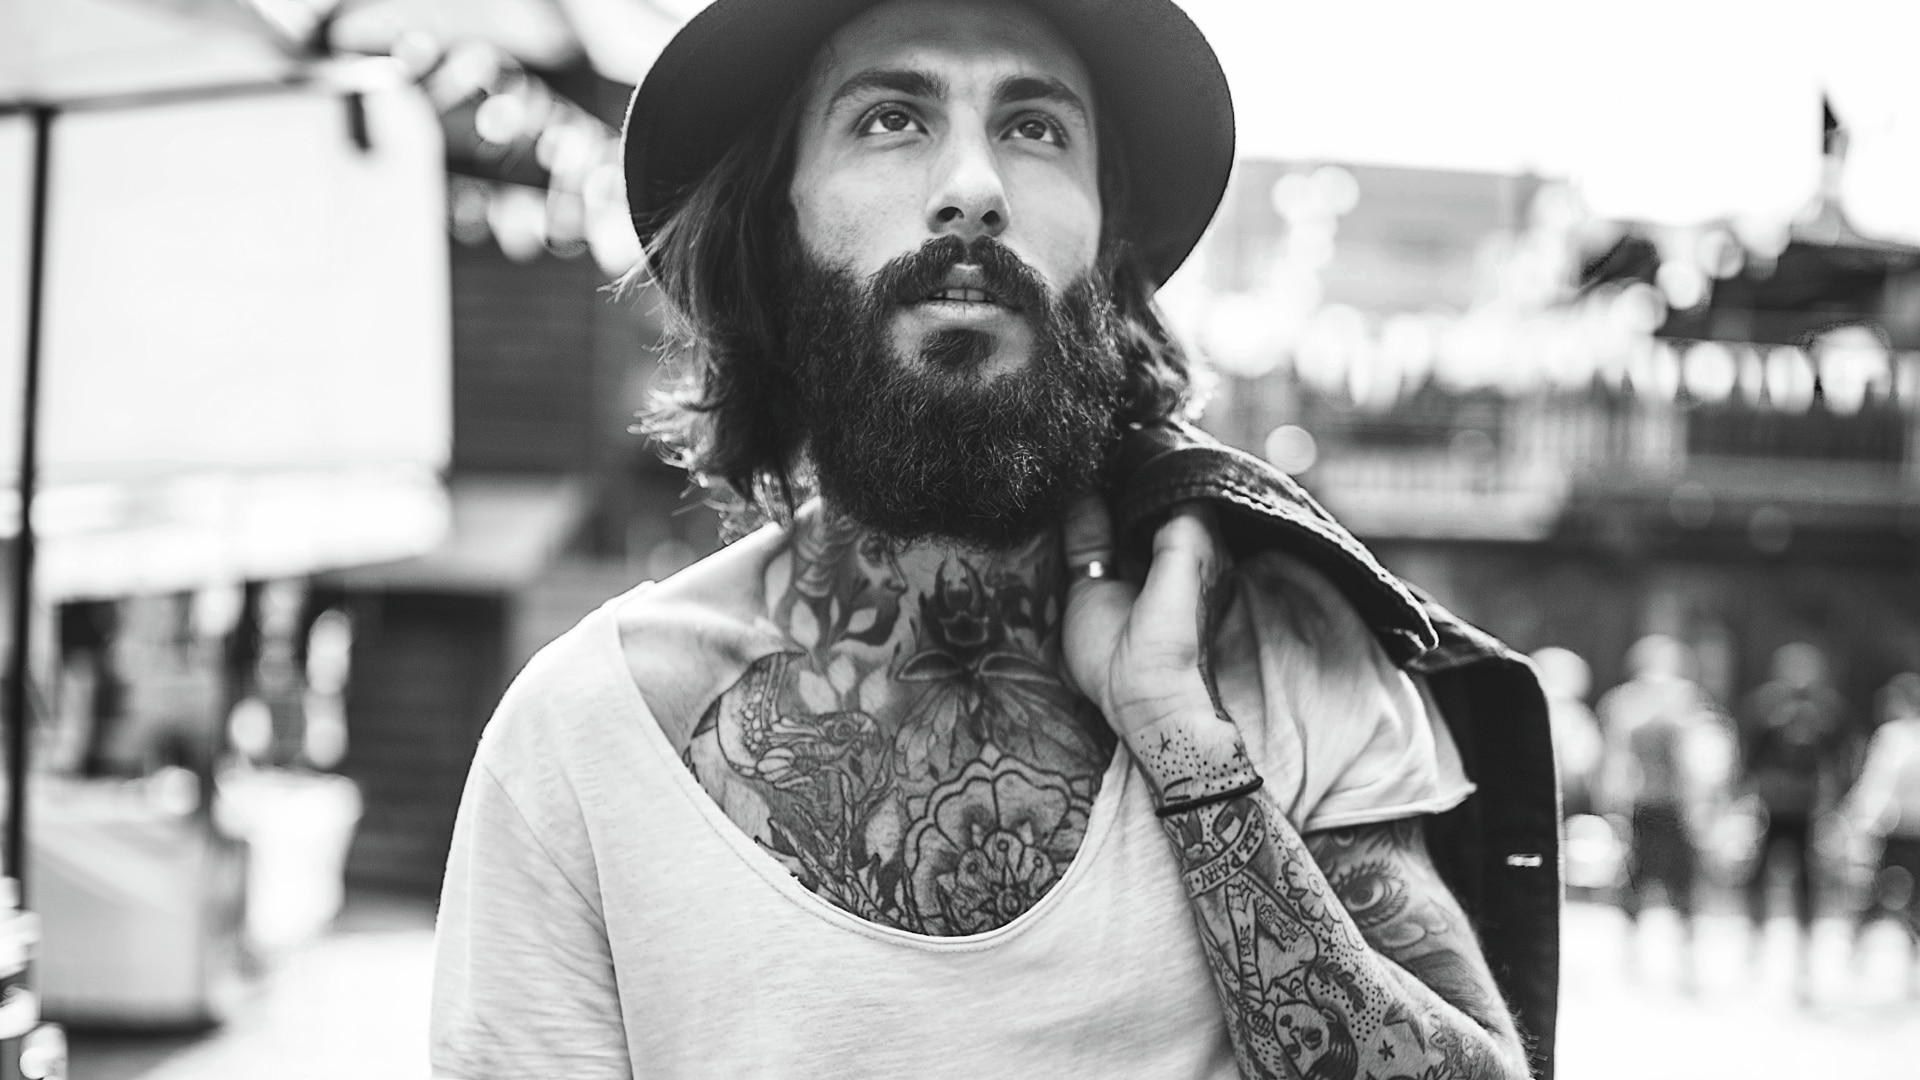 A guy with a full beard and tattoos.